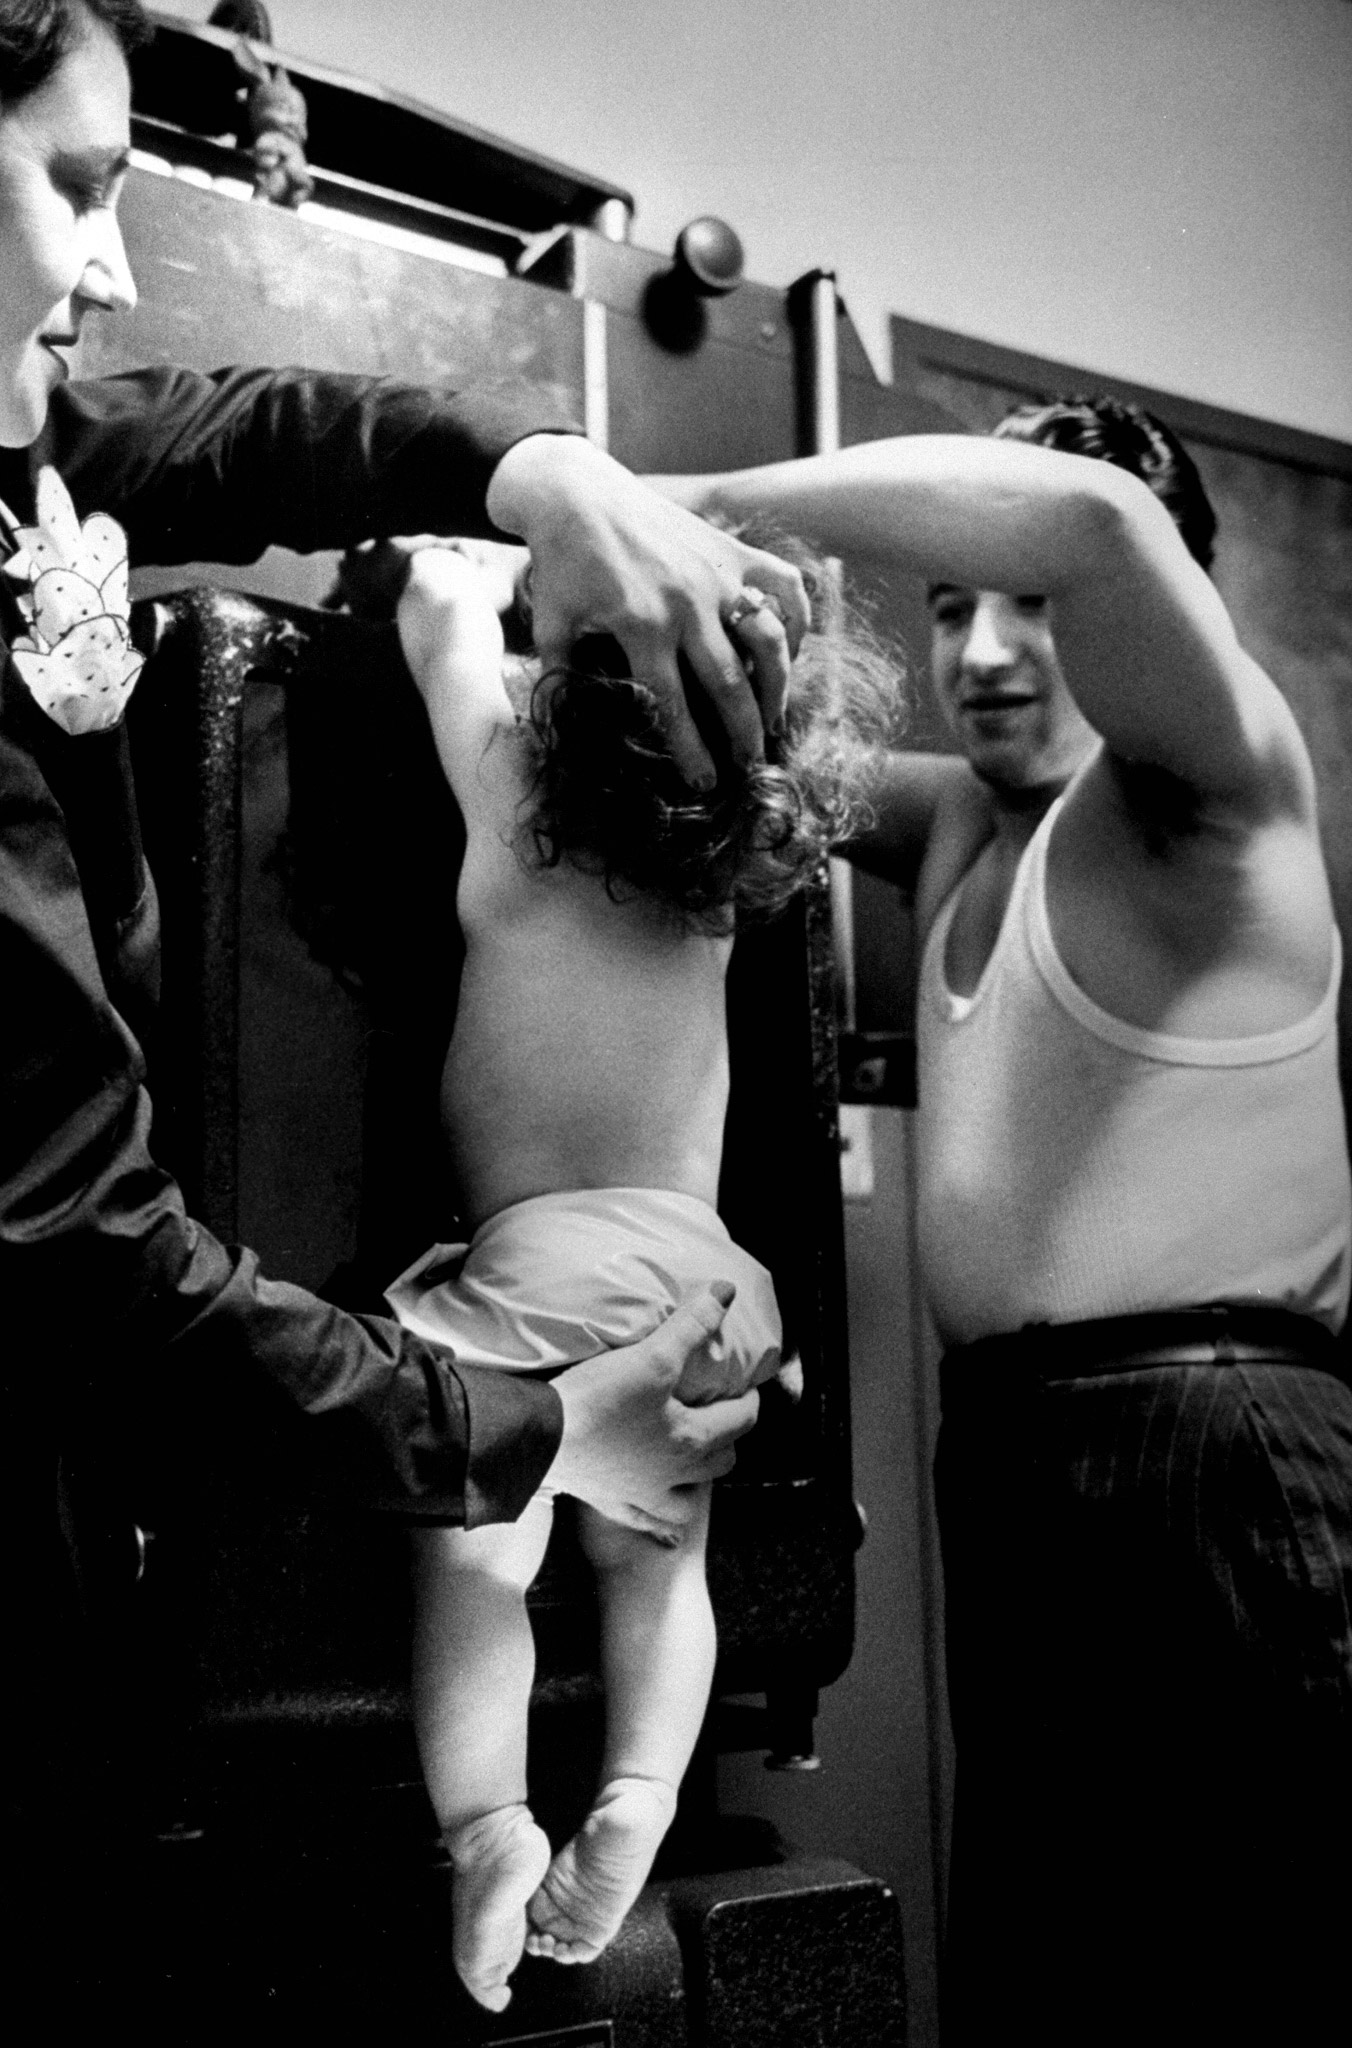 Small child being given chest x-ray at Chelsea Chest Clinic, 1949.